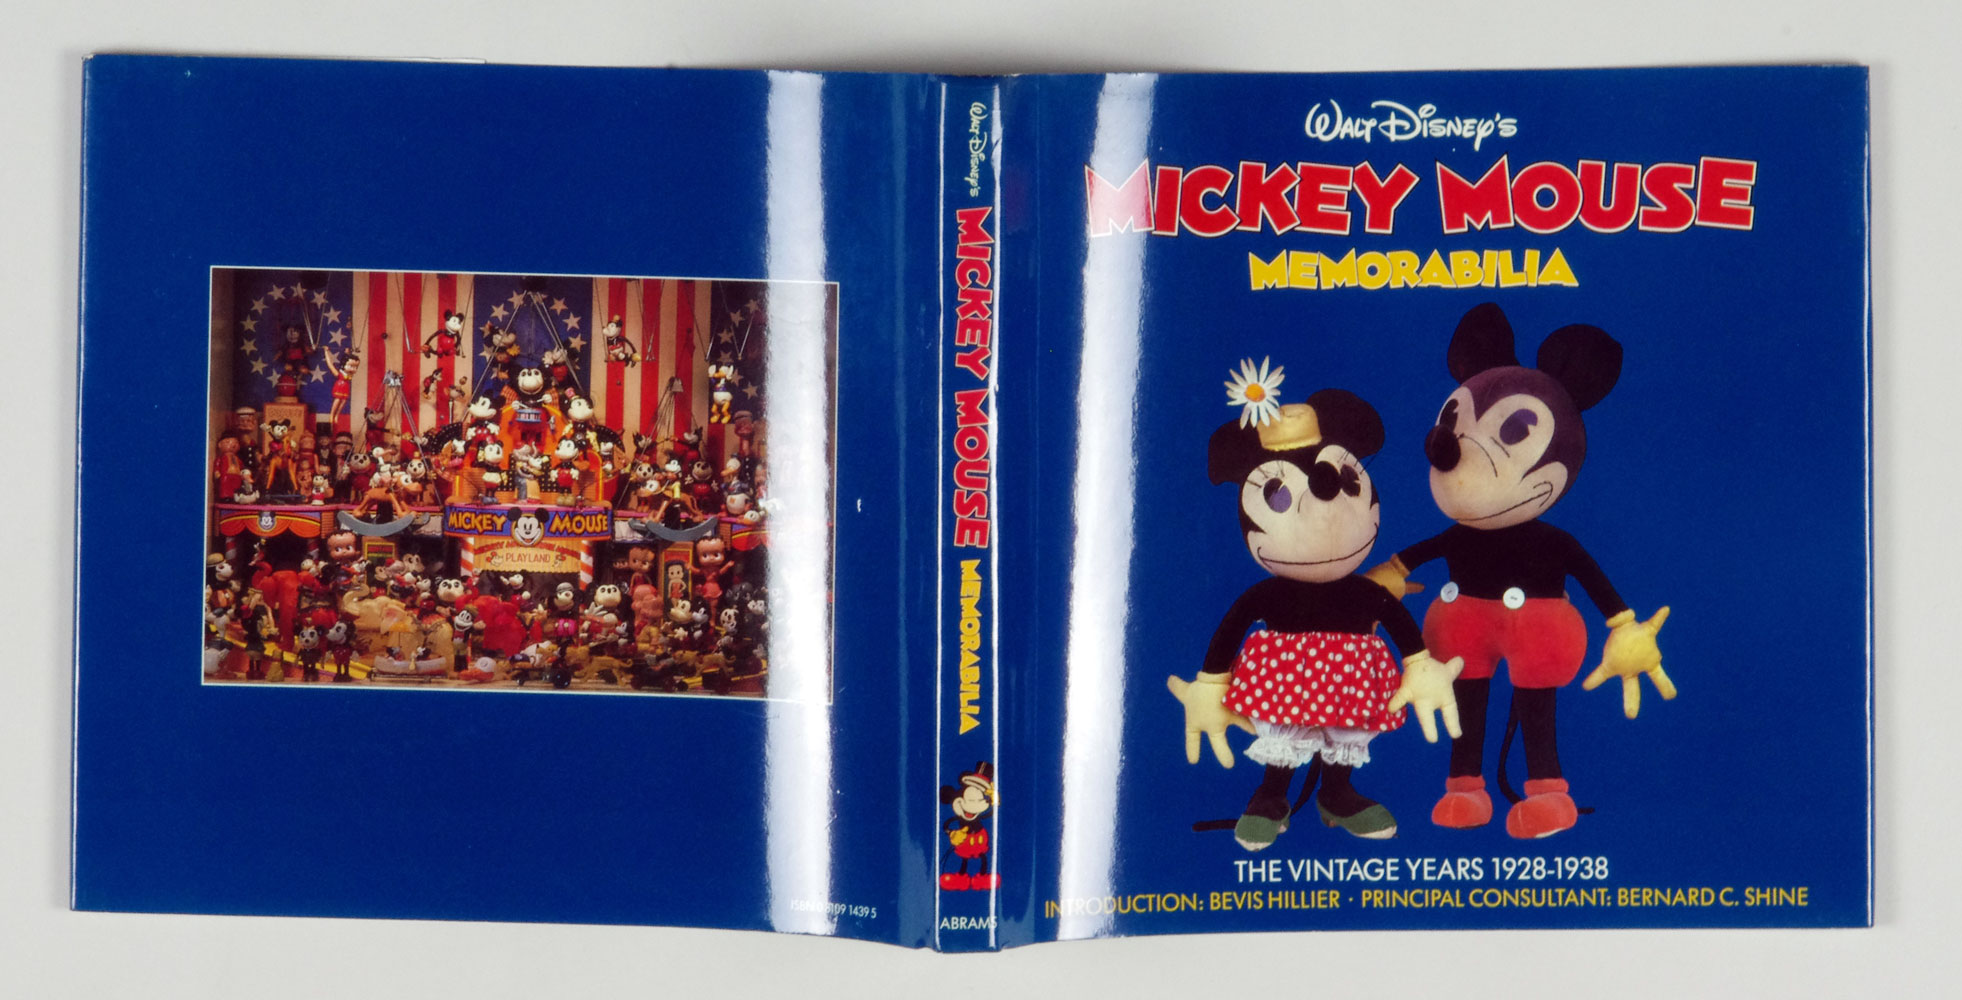 Mickey Mouse Memorabilia The Vintage Years 1928-1938 Hard Cover w/ Dust Jacket